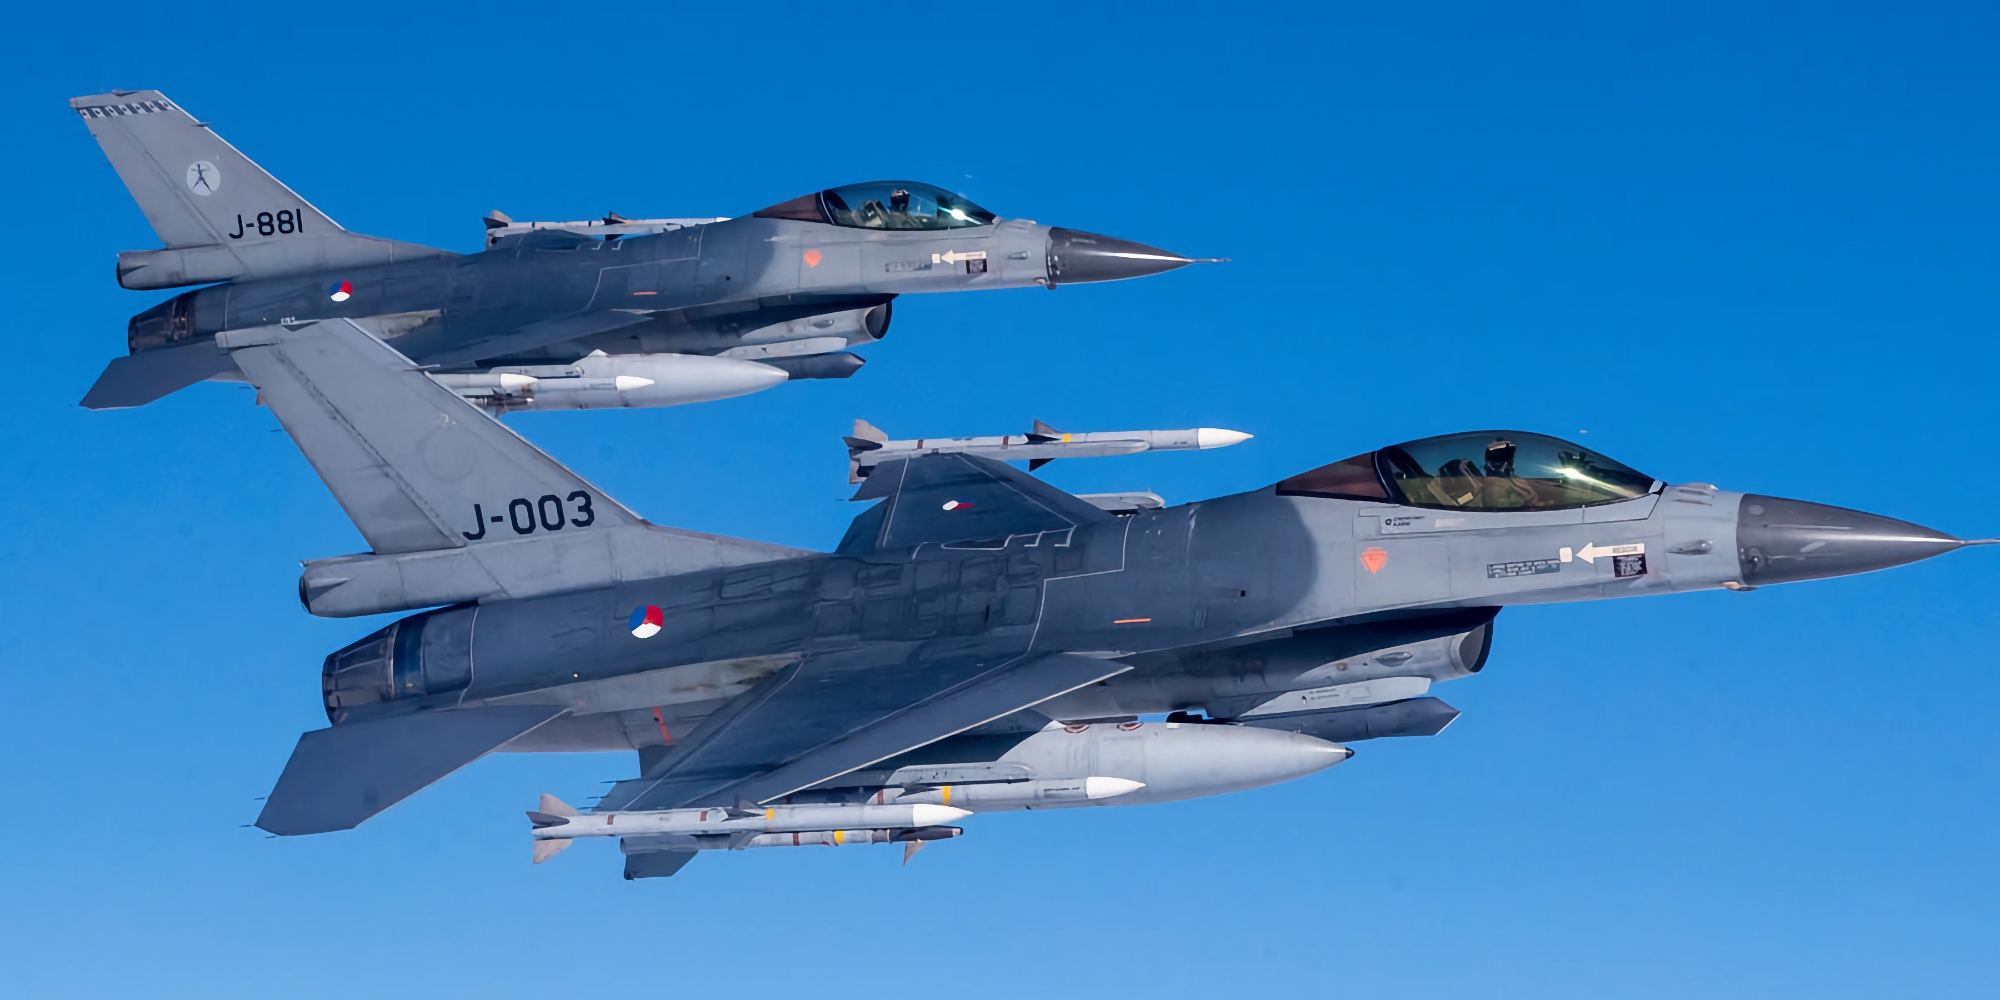 Ukraine officially submits request to Netherlands for F-16 Fighting Falcon fighters